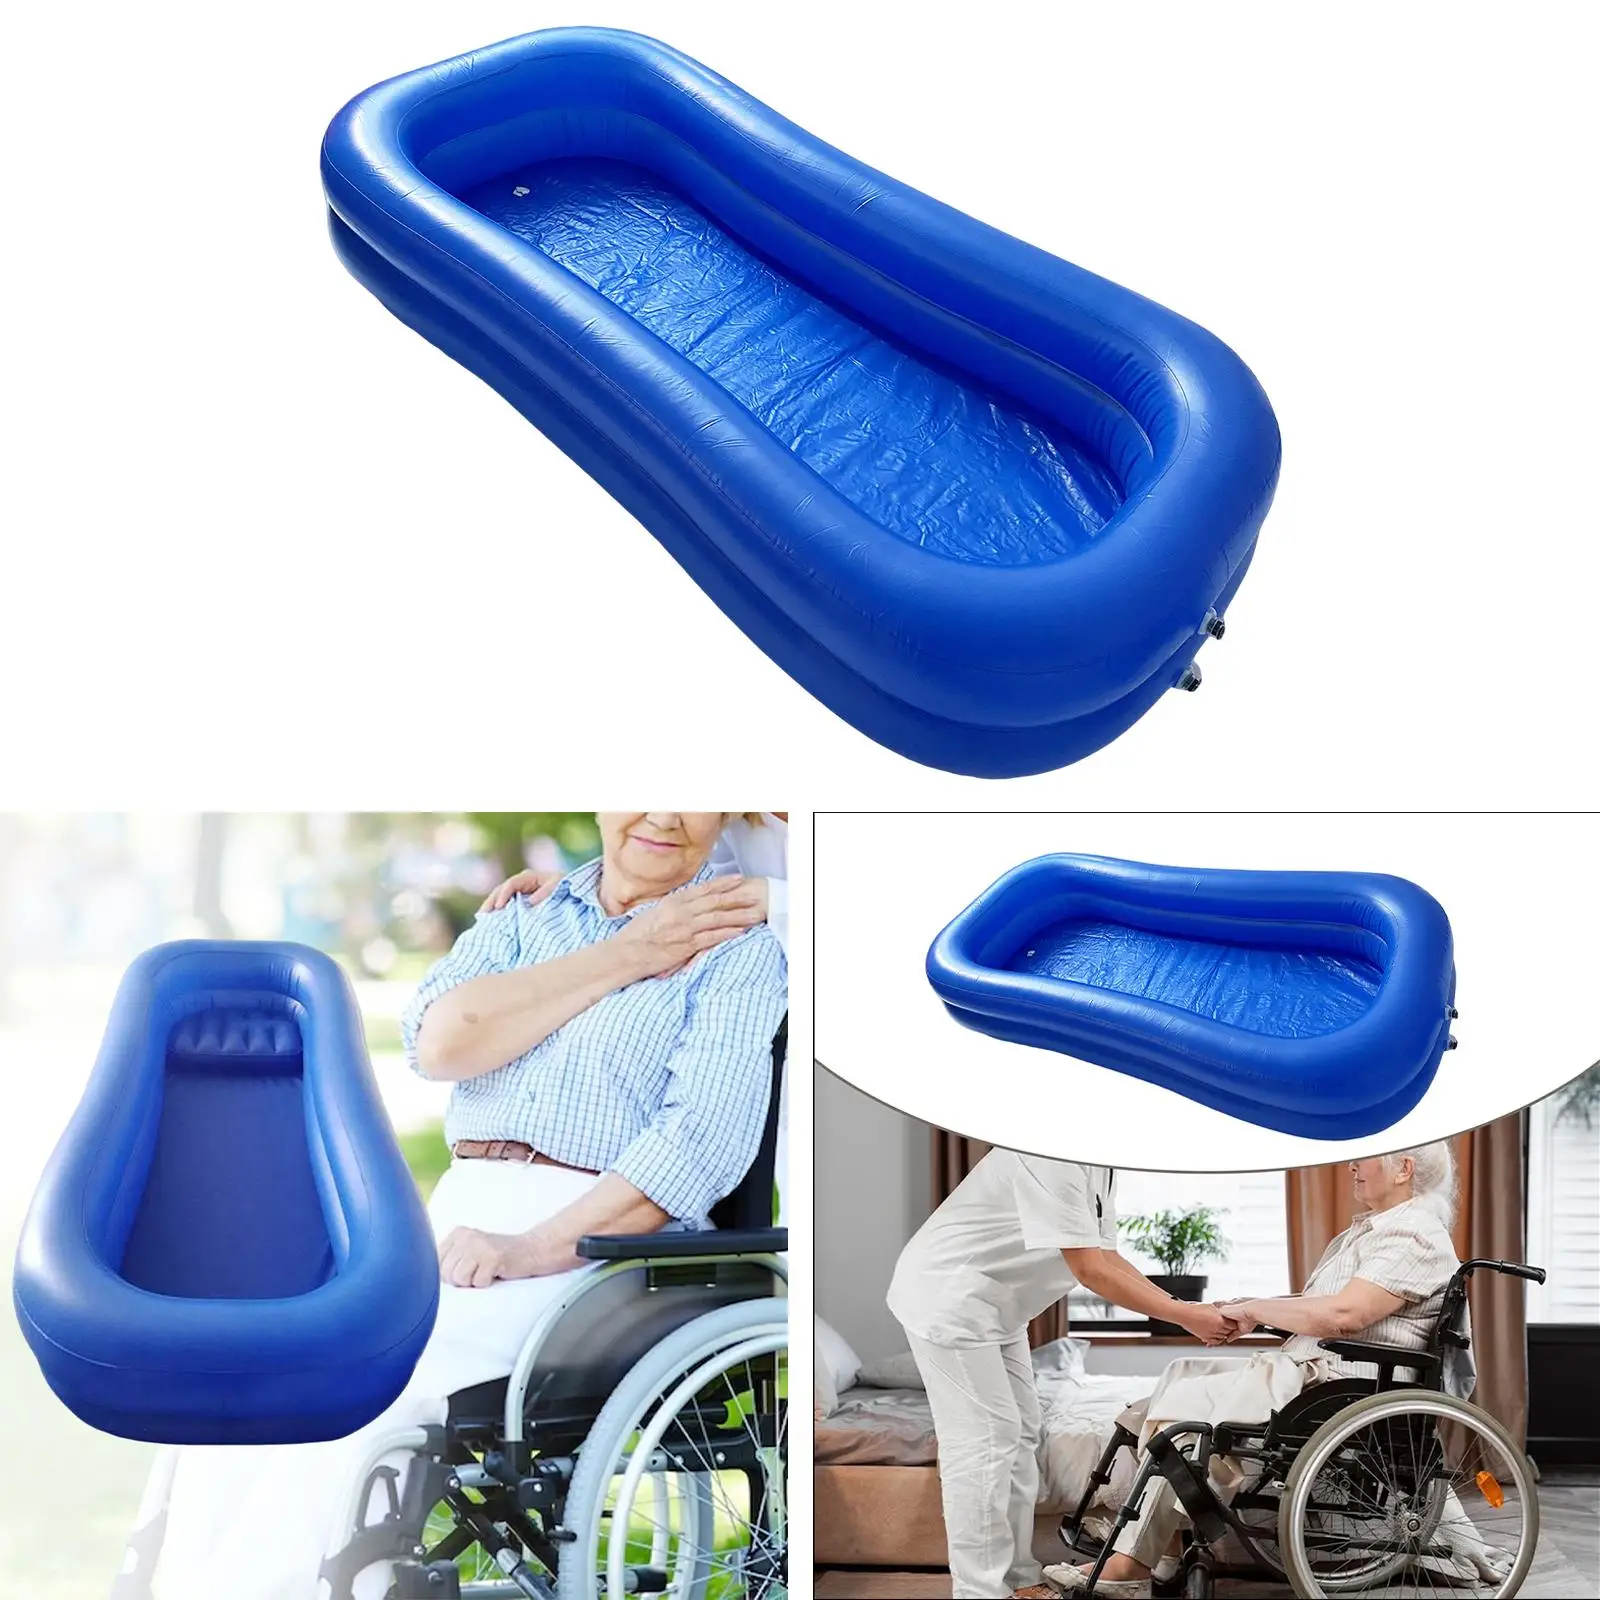 Inflatable Bathtub Lightweight Folding Comfortable Bath in Bed Assist Aid Bath Basin for Handicapped Seniors Elderly Disabled